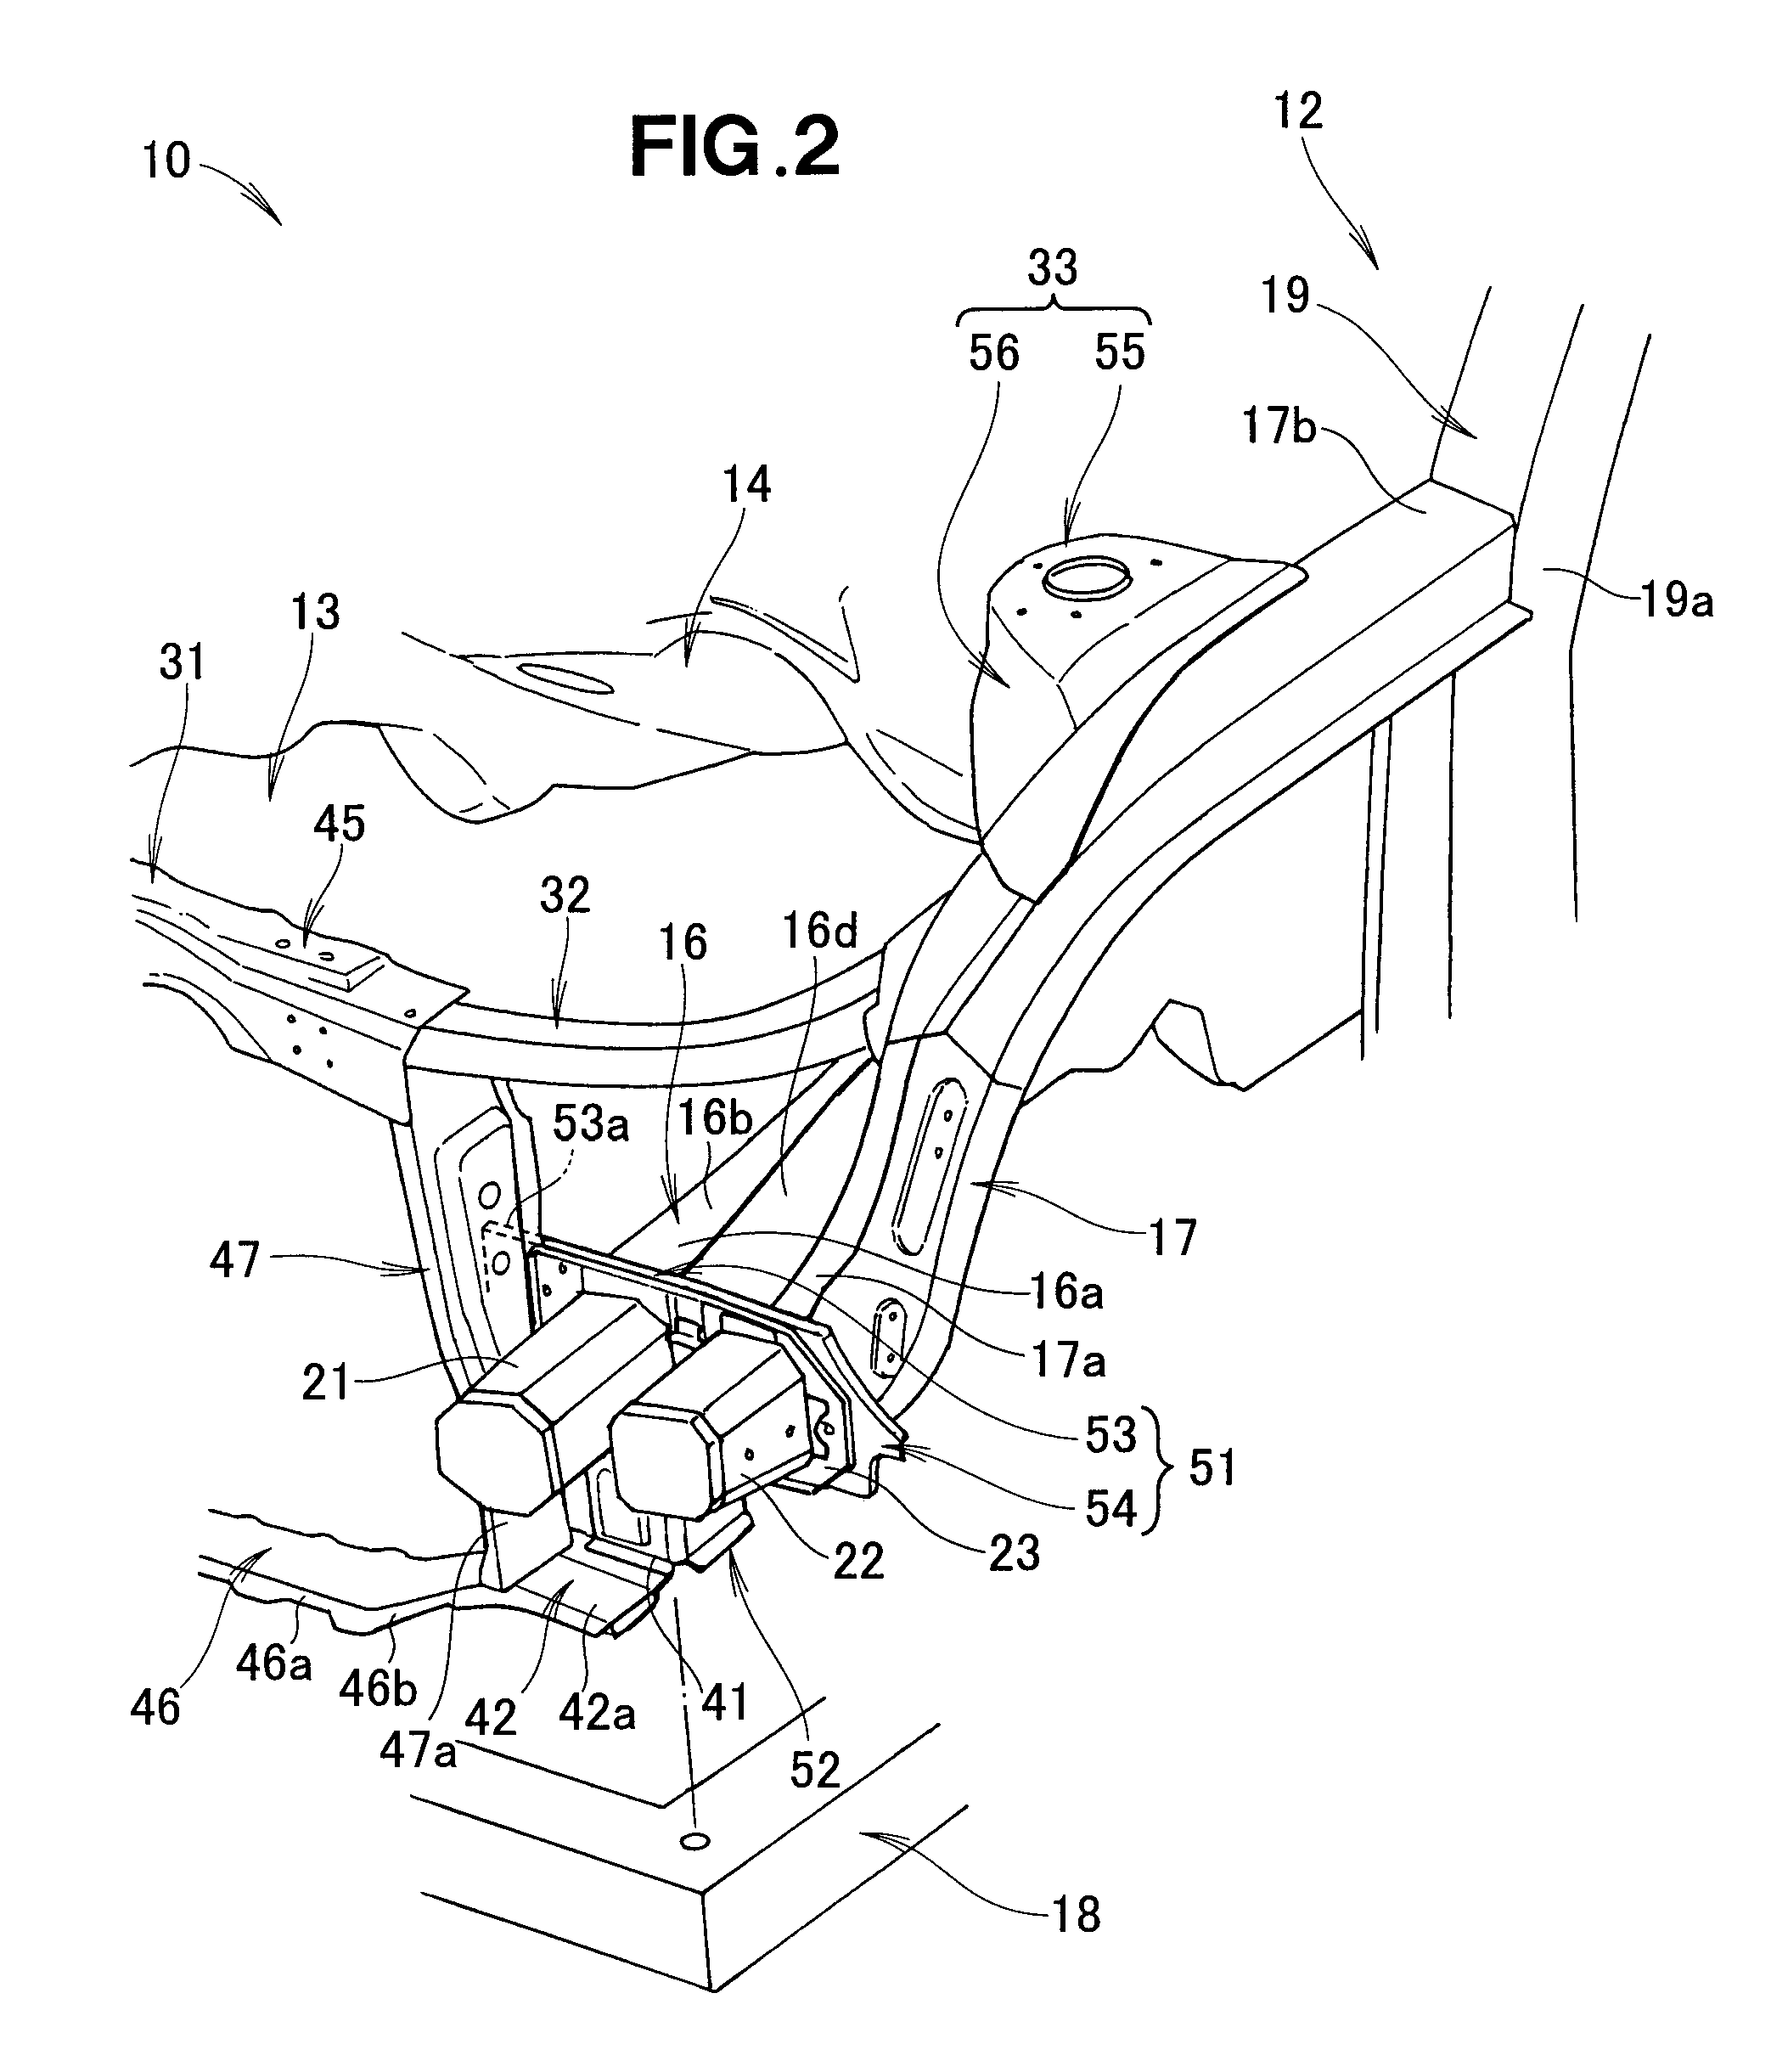 Structure of front section of vehicle body